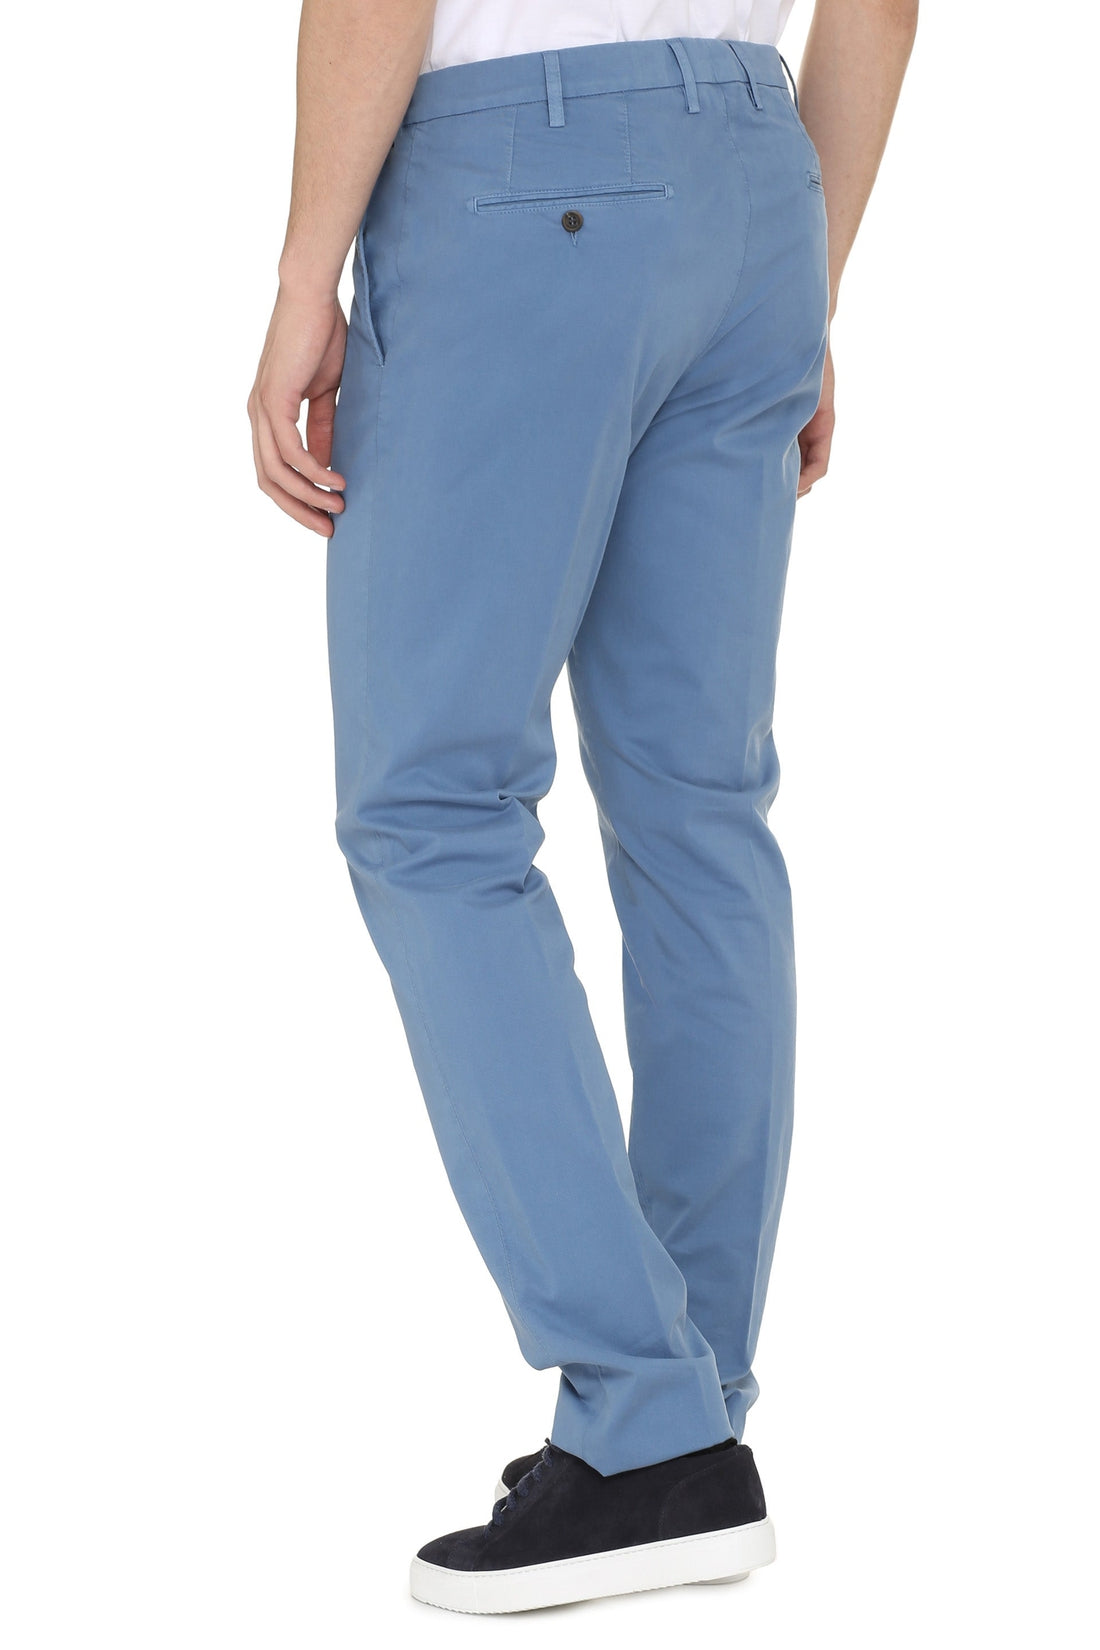 Canali-OUTLET-SALE-Cotton Chino trousers-ARCHIVIST